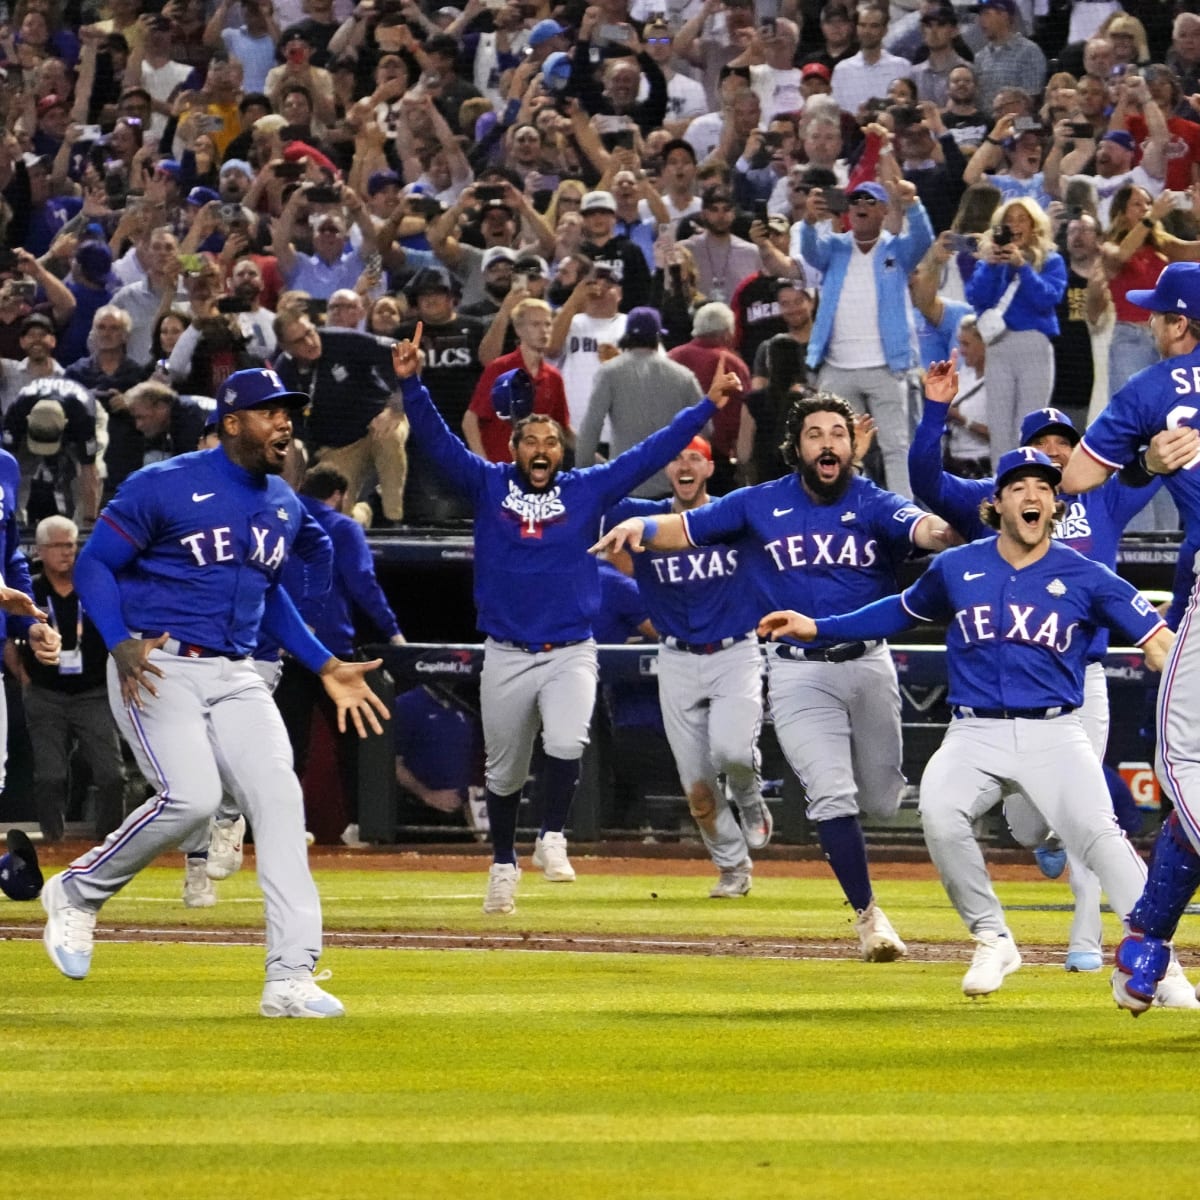 Texas Rangers win their first-ever World Series title, beating the